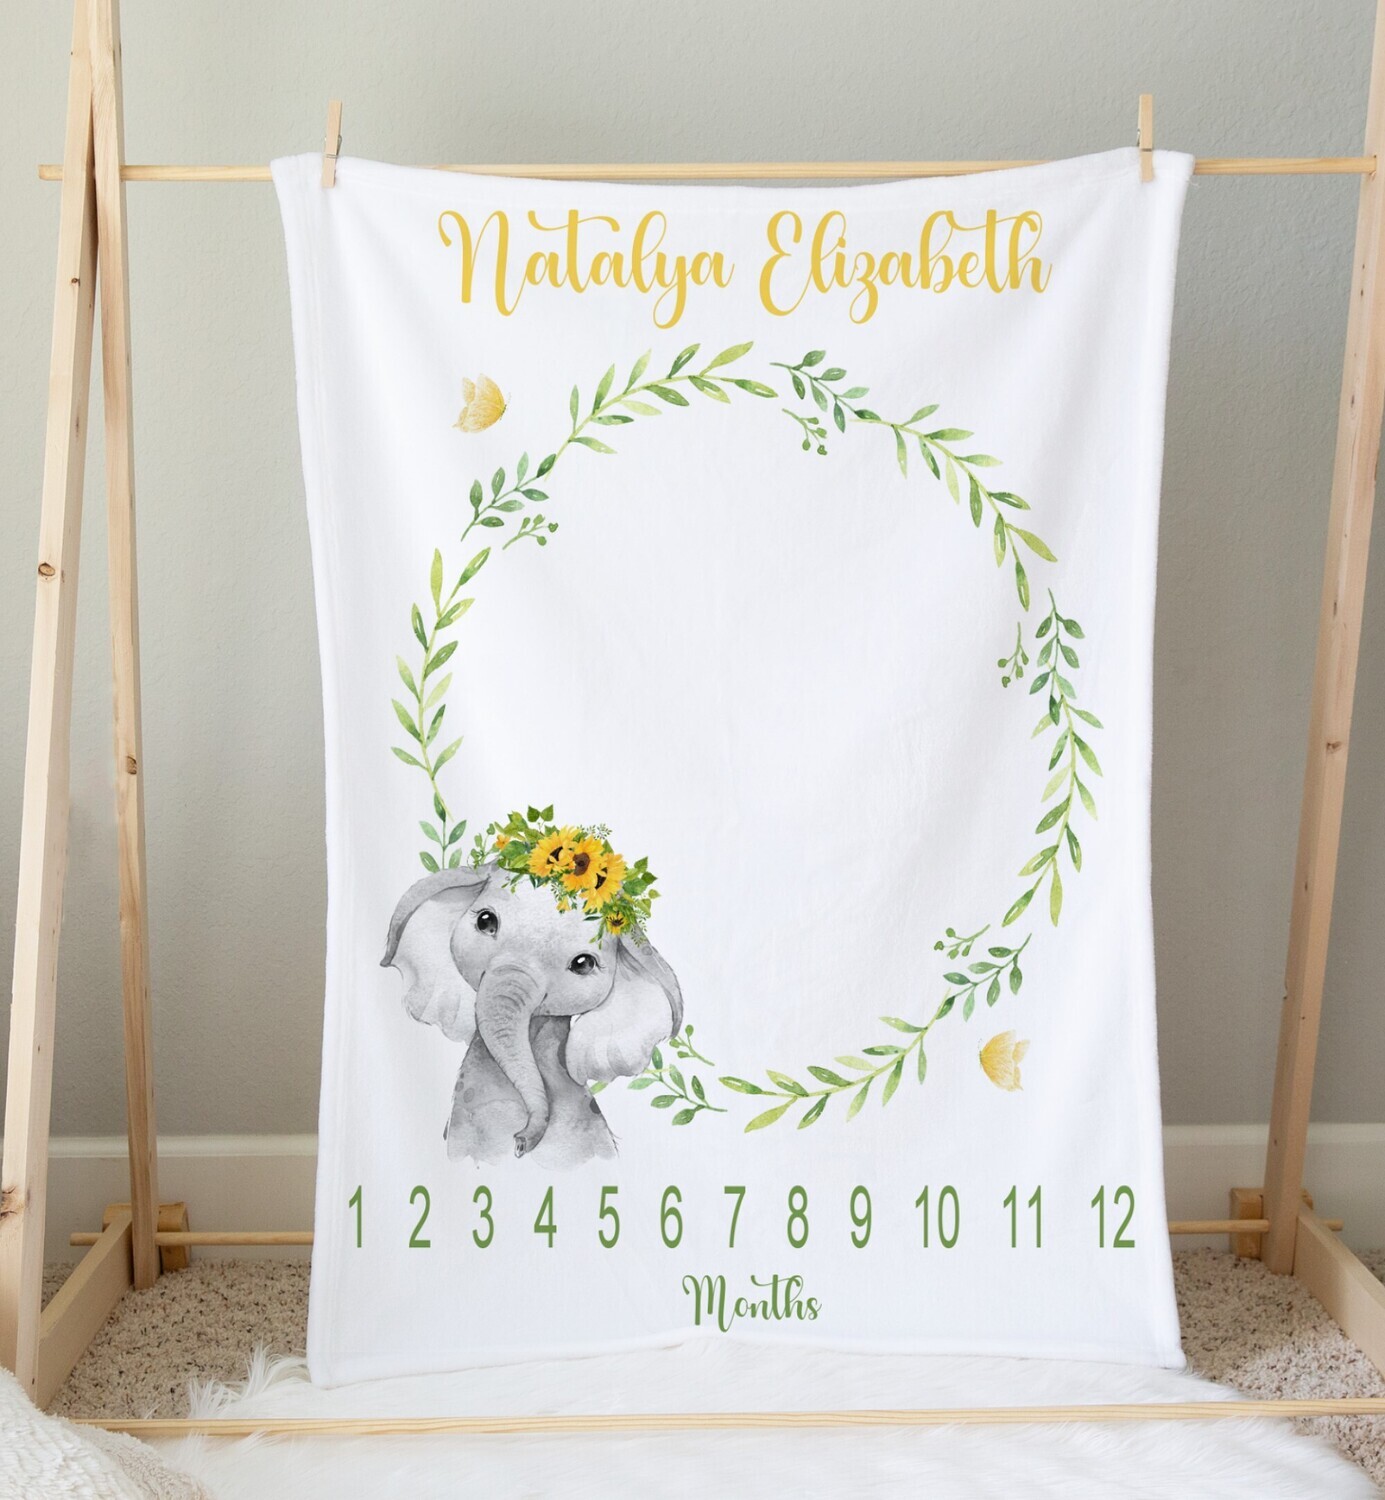 Sunflower Elephant Baby Girl Milestone Blanket Yellow Floral Crown Elephant Personalized Monthly Baby Blanket New Baby Shower Gift Baby Photo Op Backdrop